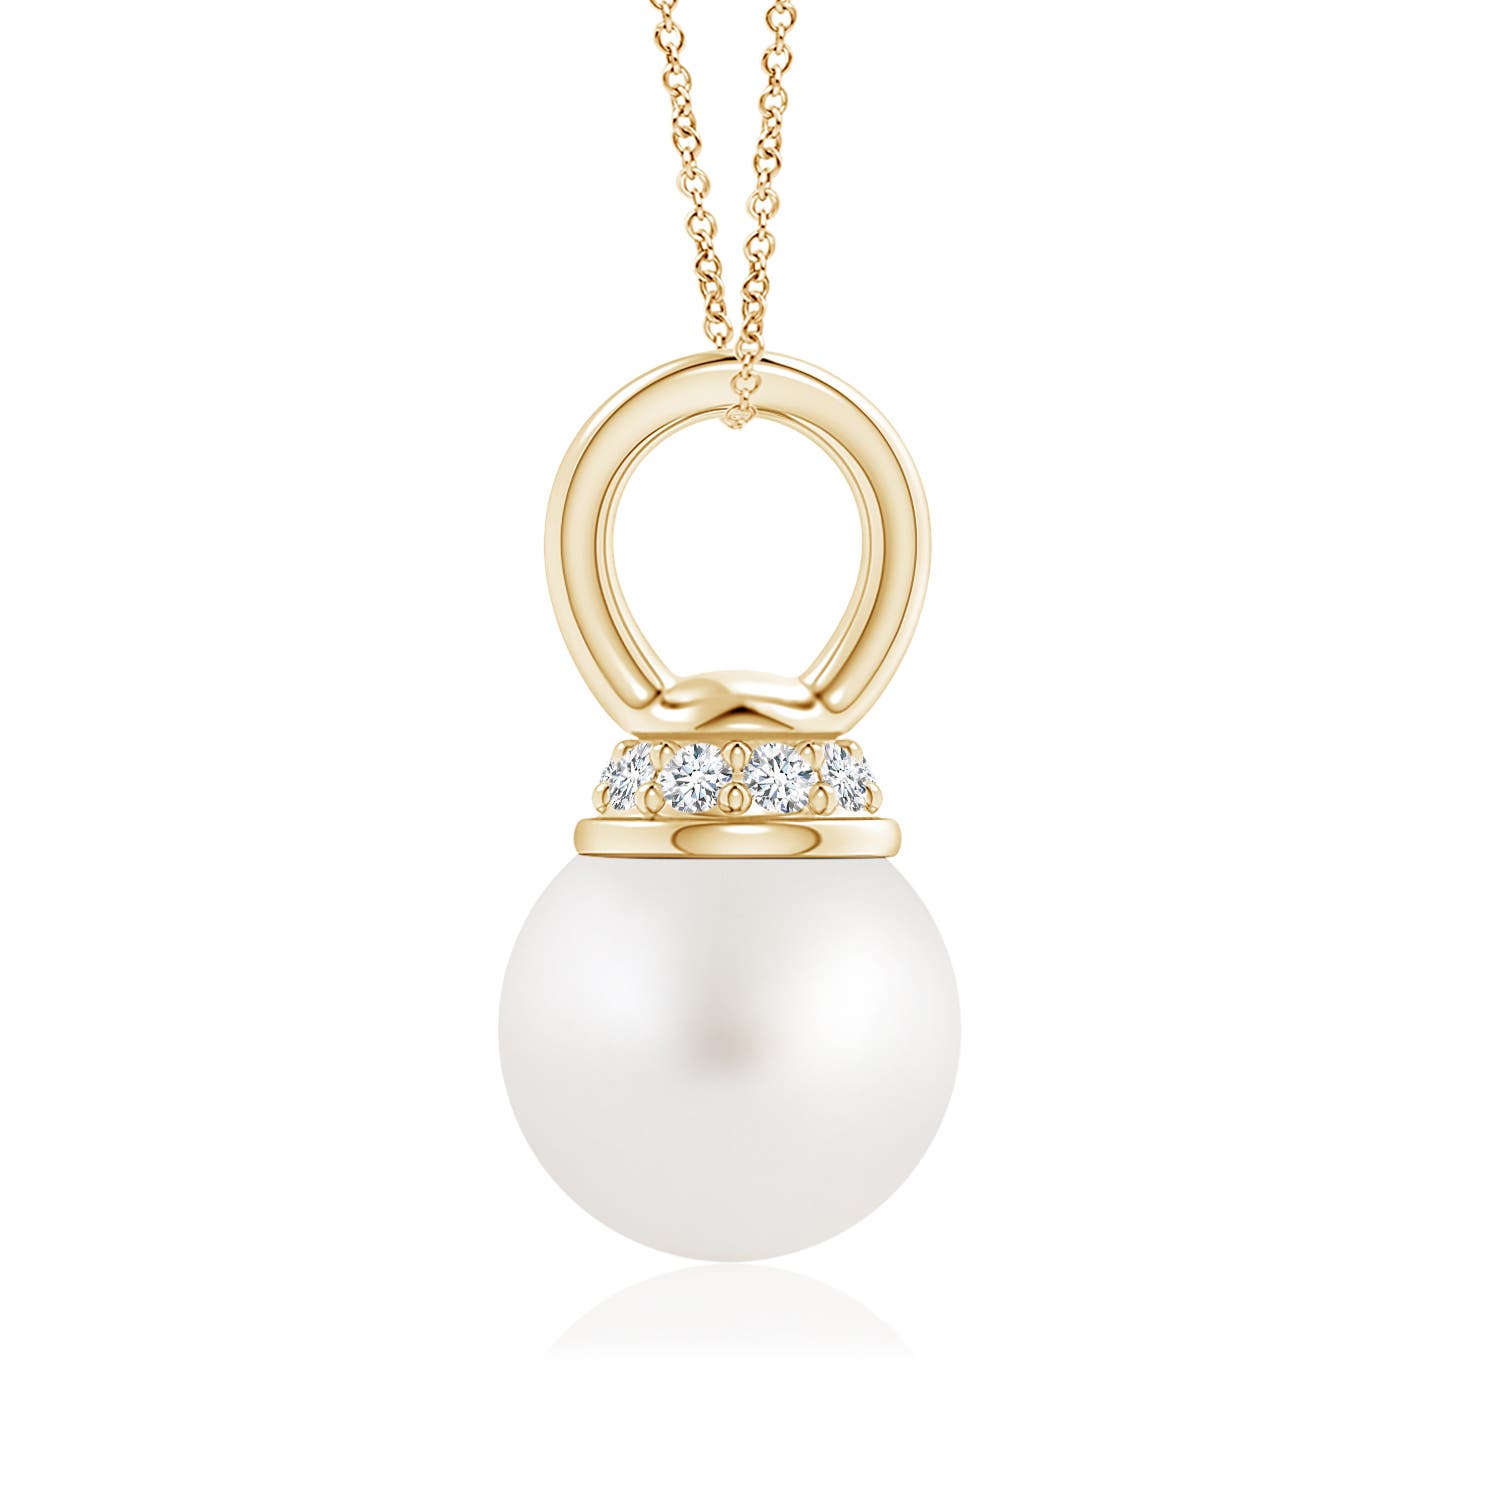 AA - South Sea Cultured Pearl / 3.79 CT / 14 KT Yellow Gold